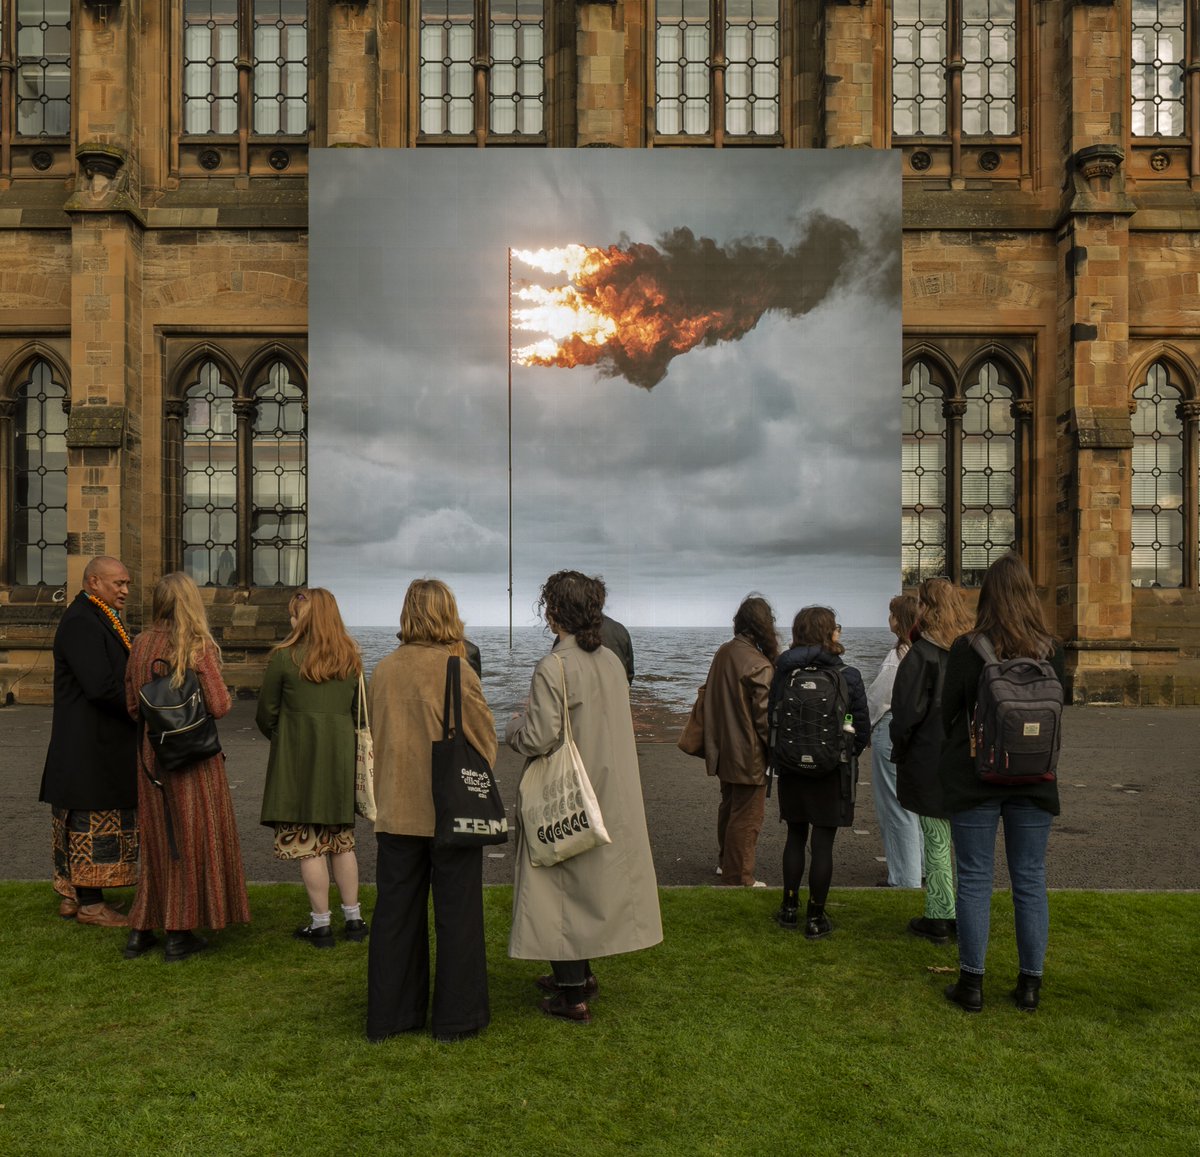 On this day of collective action at #COP26Glasgow, we are discussing the role of art in the climate emergency. Roundtable at Hunterian Art Gallery, 430pm, featuring @YEEnetwork @IPCC_CH and co-moderated by Alice Audouin @Artofchange21 & Dominic Paterson. ow.ly/kbge50GHAt9